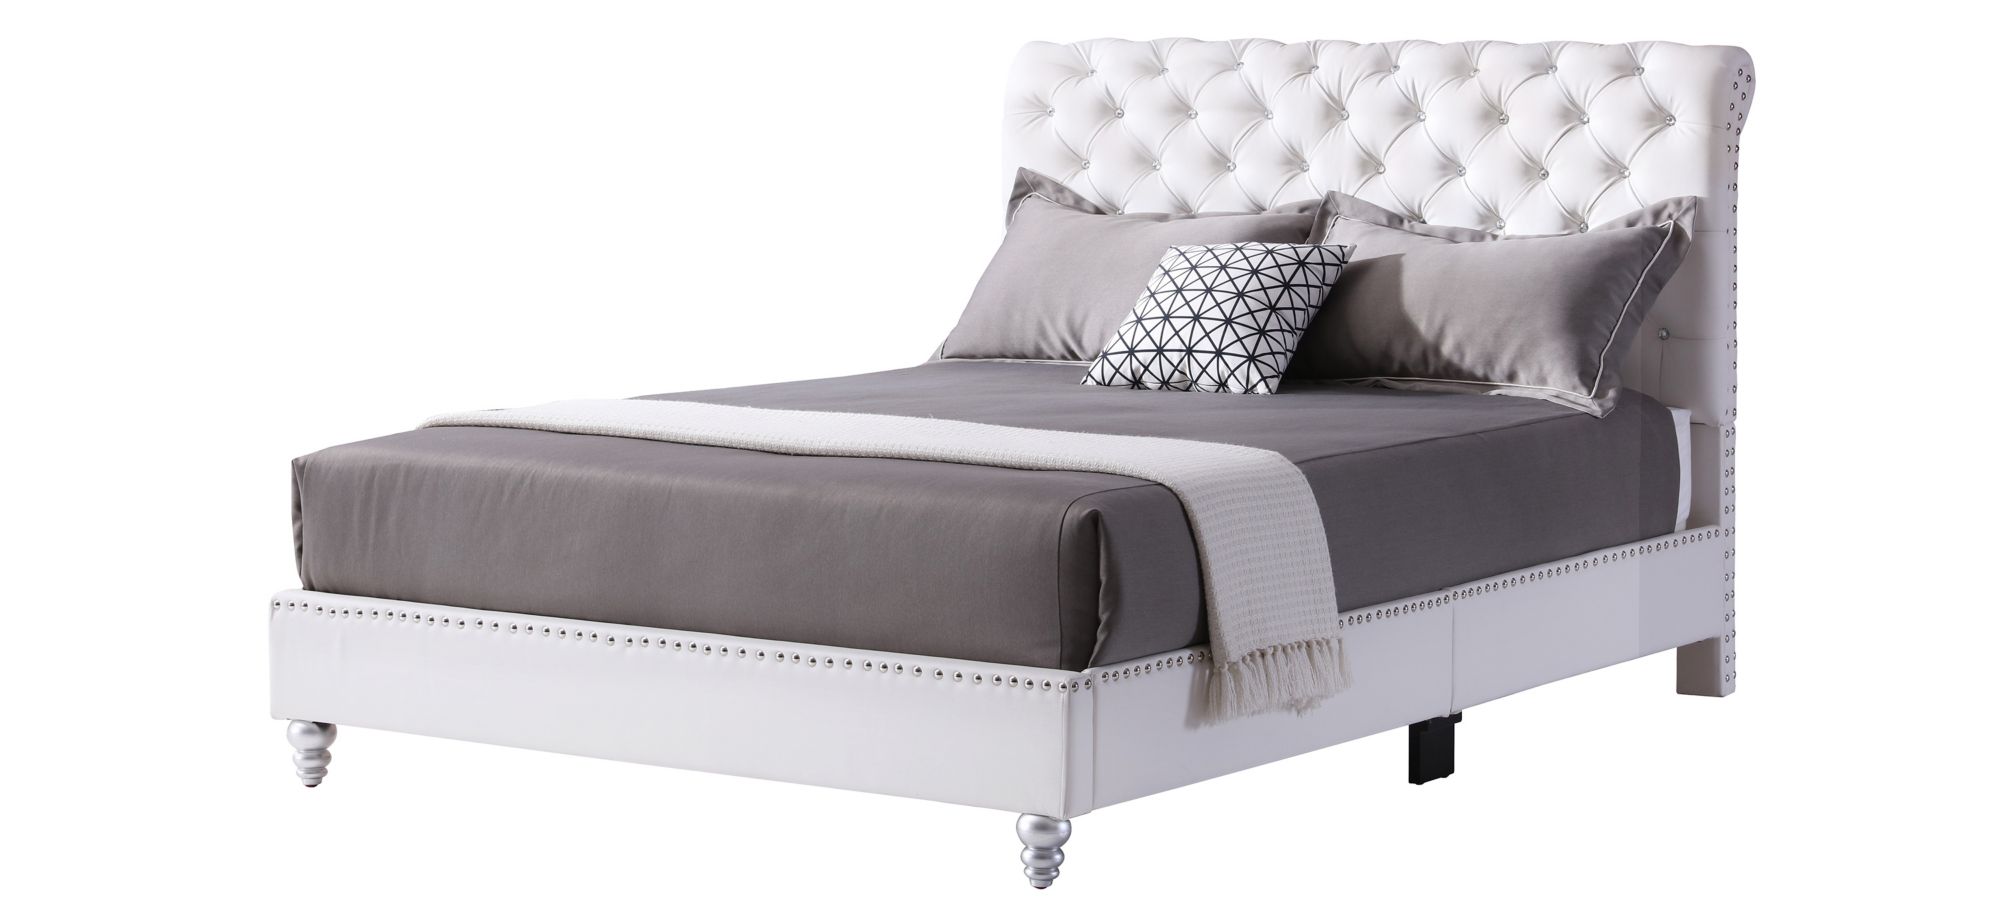 Maxx Upholstered Sleigh Bed in White by Glory Furniture